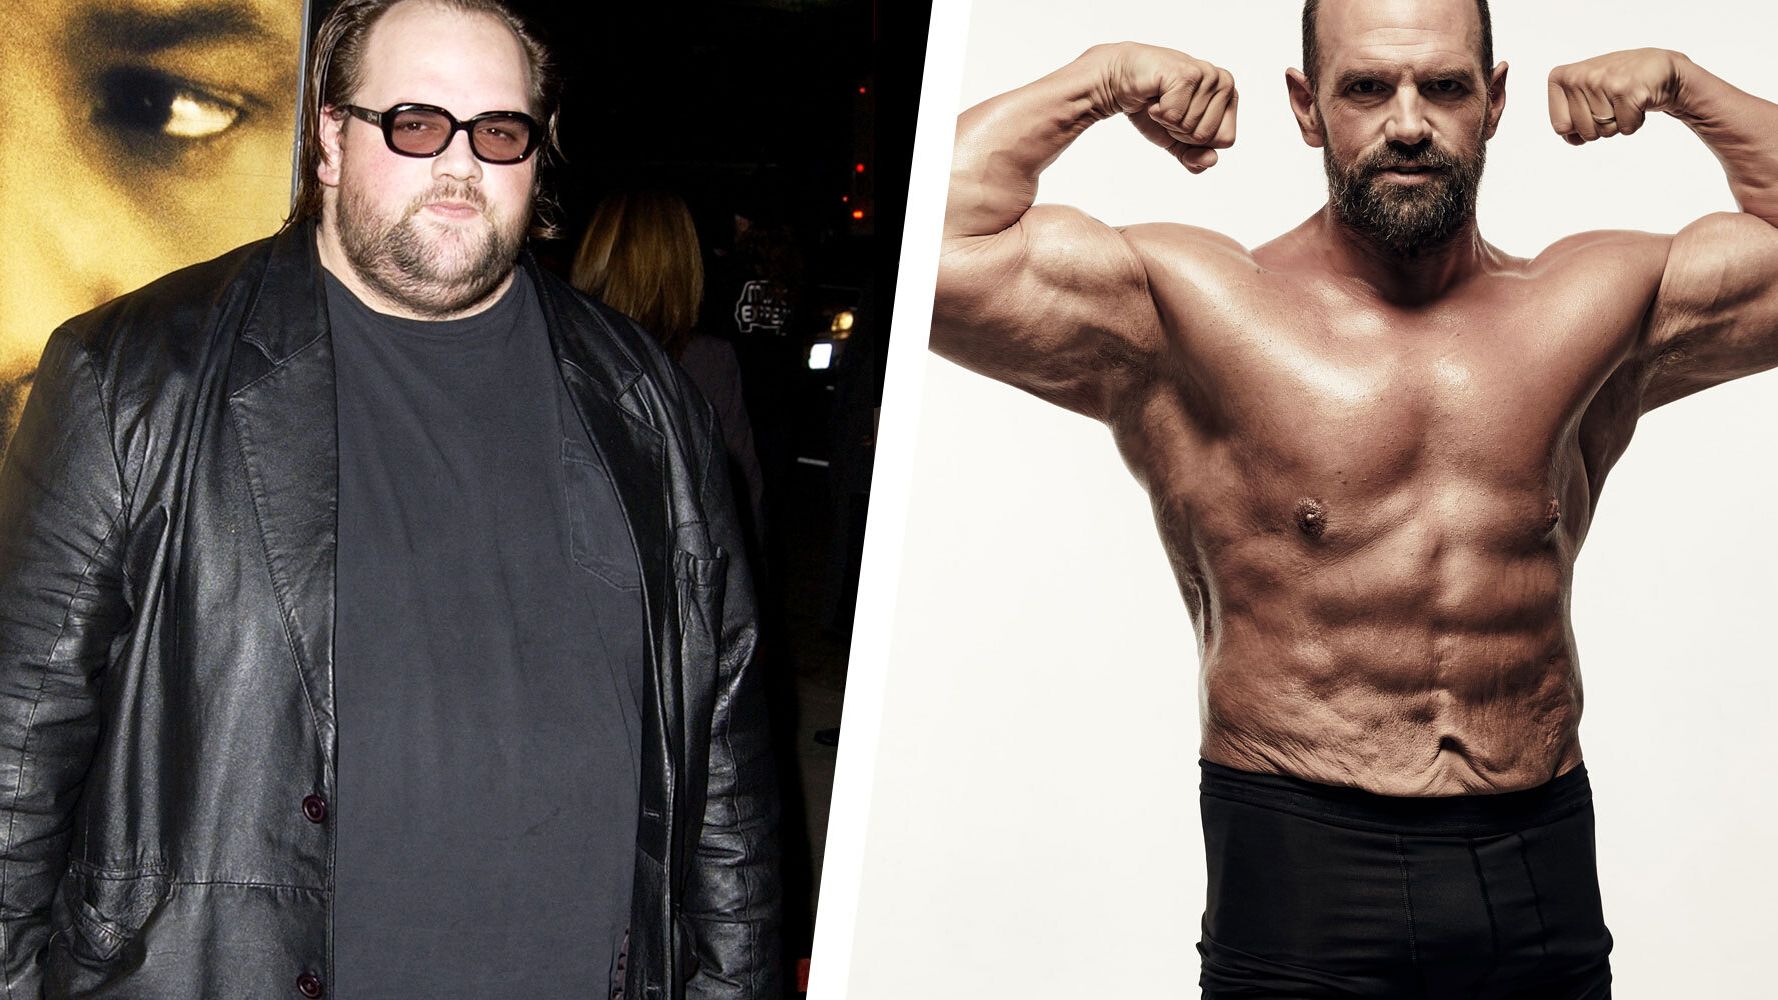 Body Mass Xxx Video - Actor Ethan Suplee, on His Abs, Weight Loss, and Mental Strength